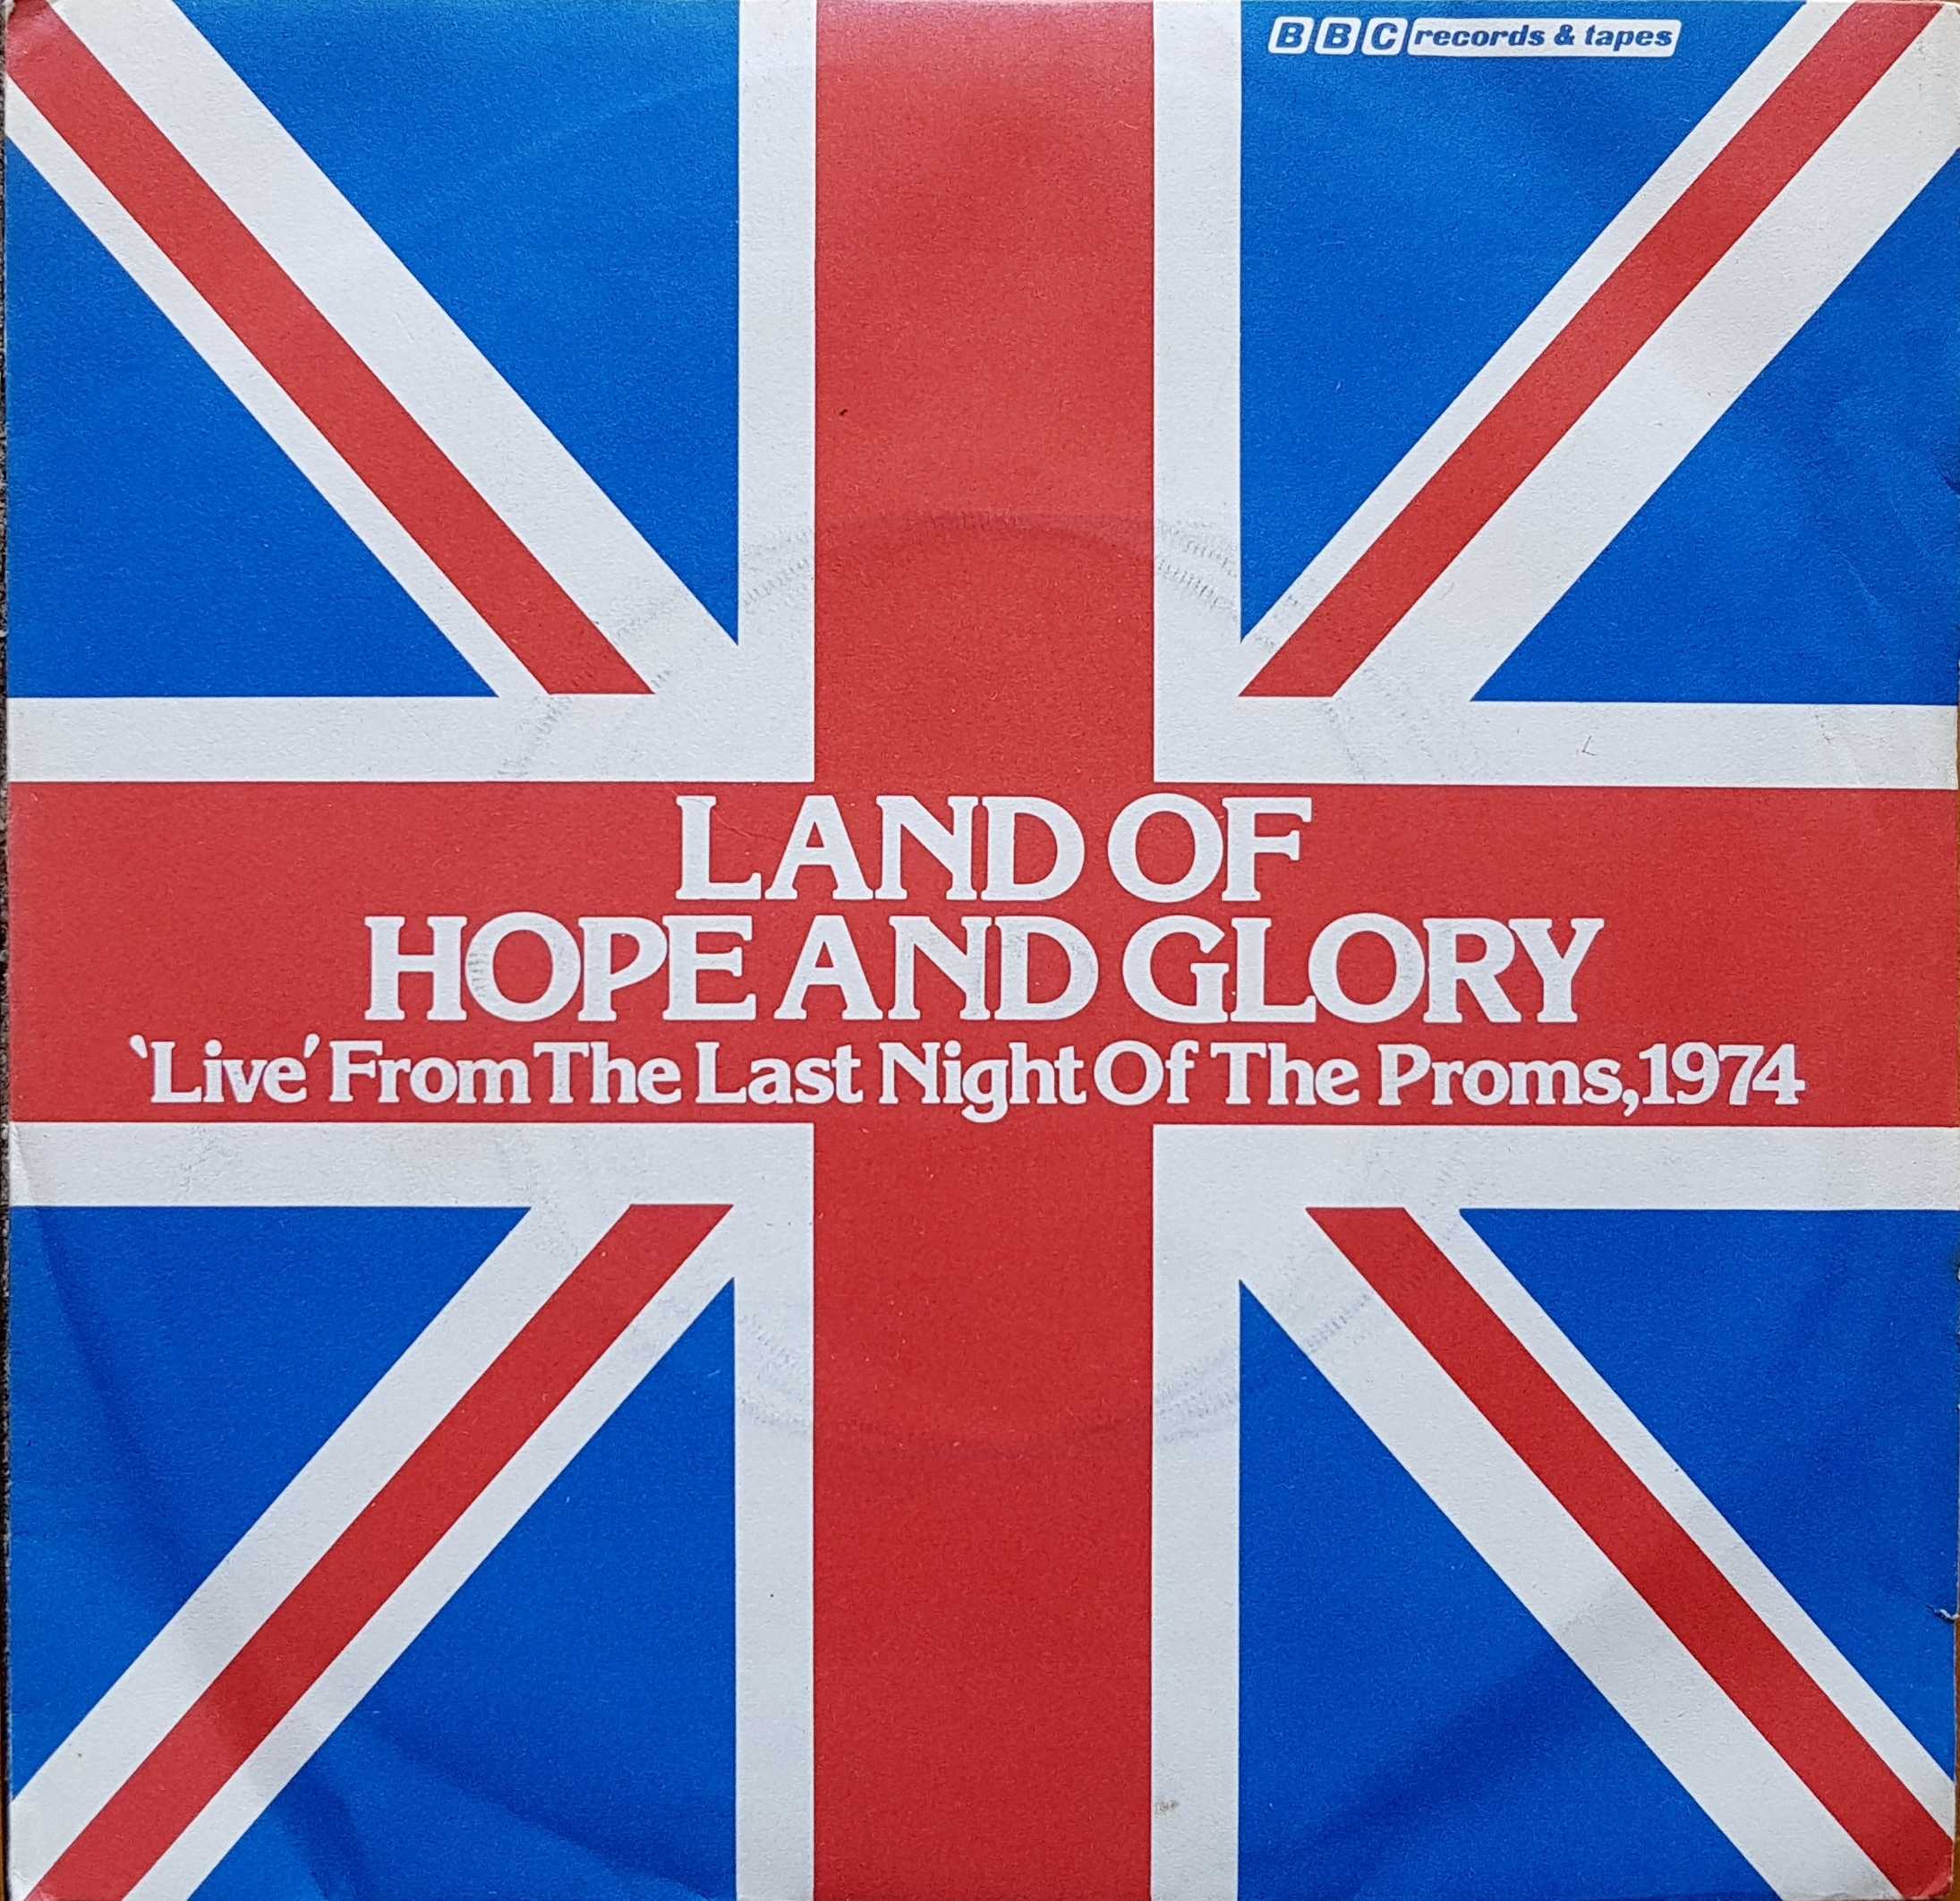 Picture of RESL 48 Land of hope and glory single by artist Sir Edward Elgar from the BBC records and Tapes library